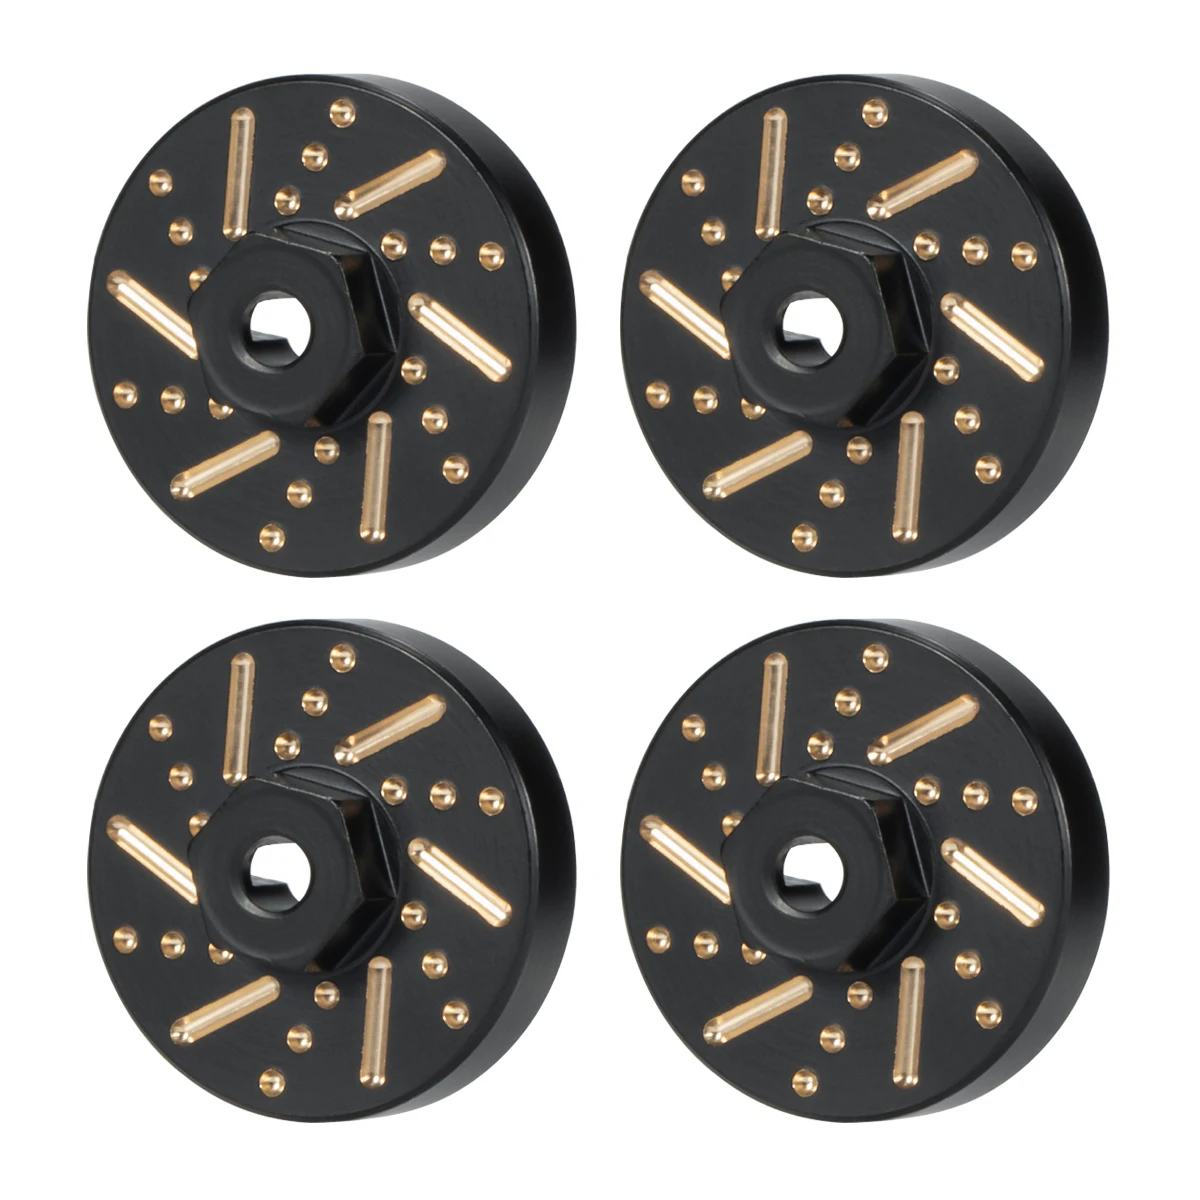 

4PCS Brass Extended Wheel Hubs Hex +3mm Adapter for 1/24 RC Crawler Axial SCX24 Deadbolt C10 Gladiator Bronco Upgrade